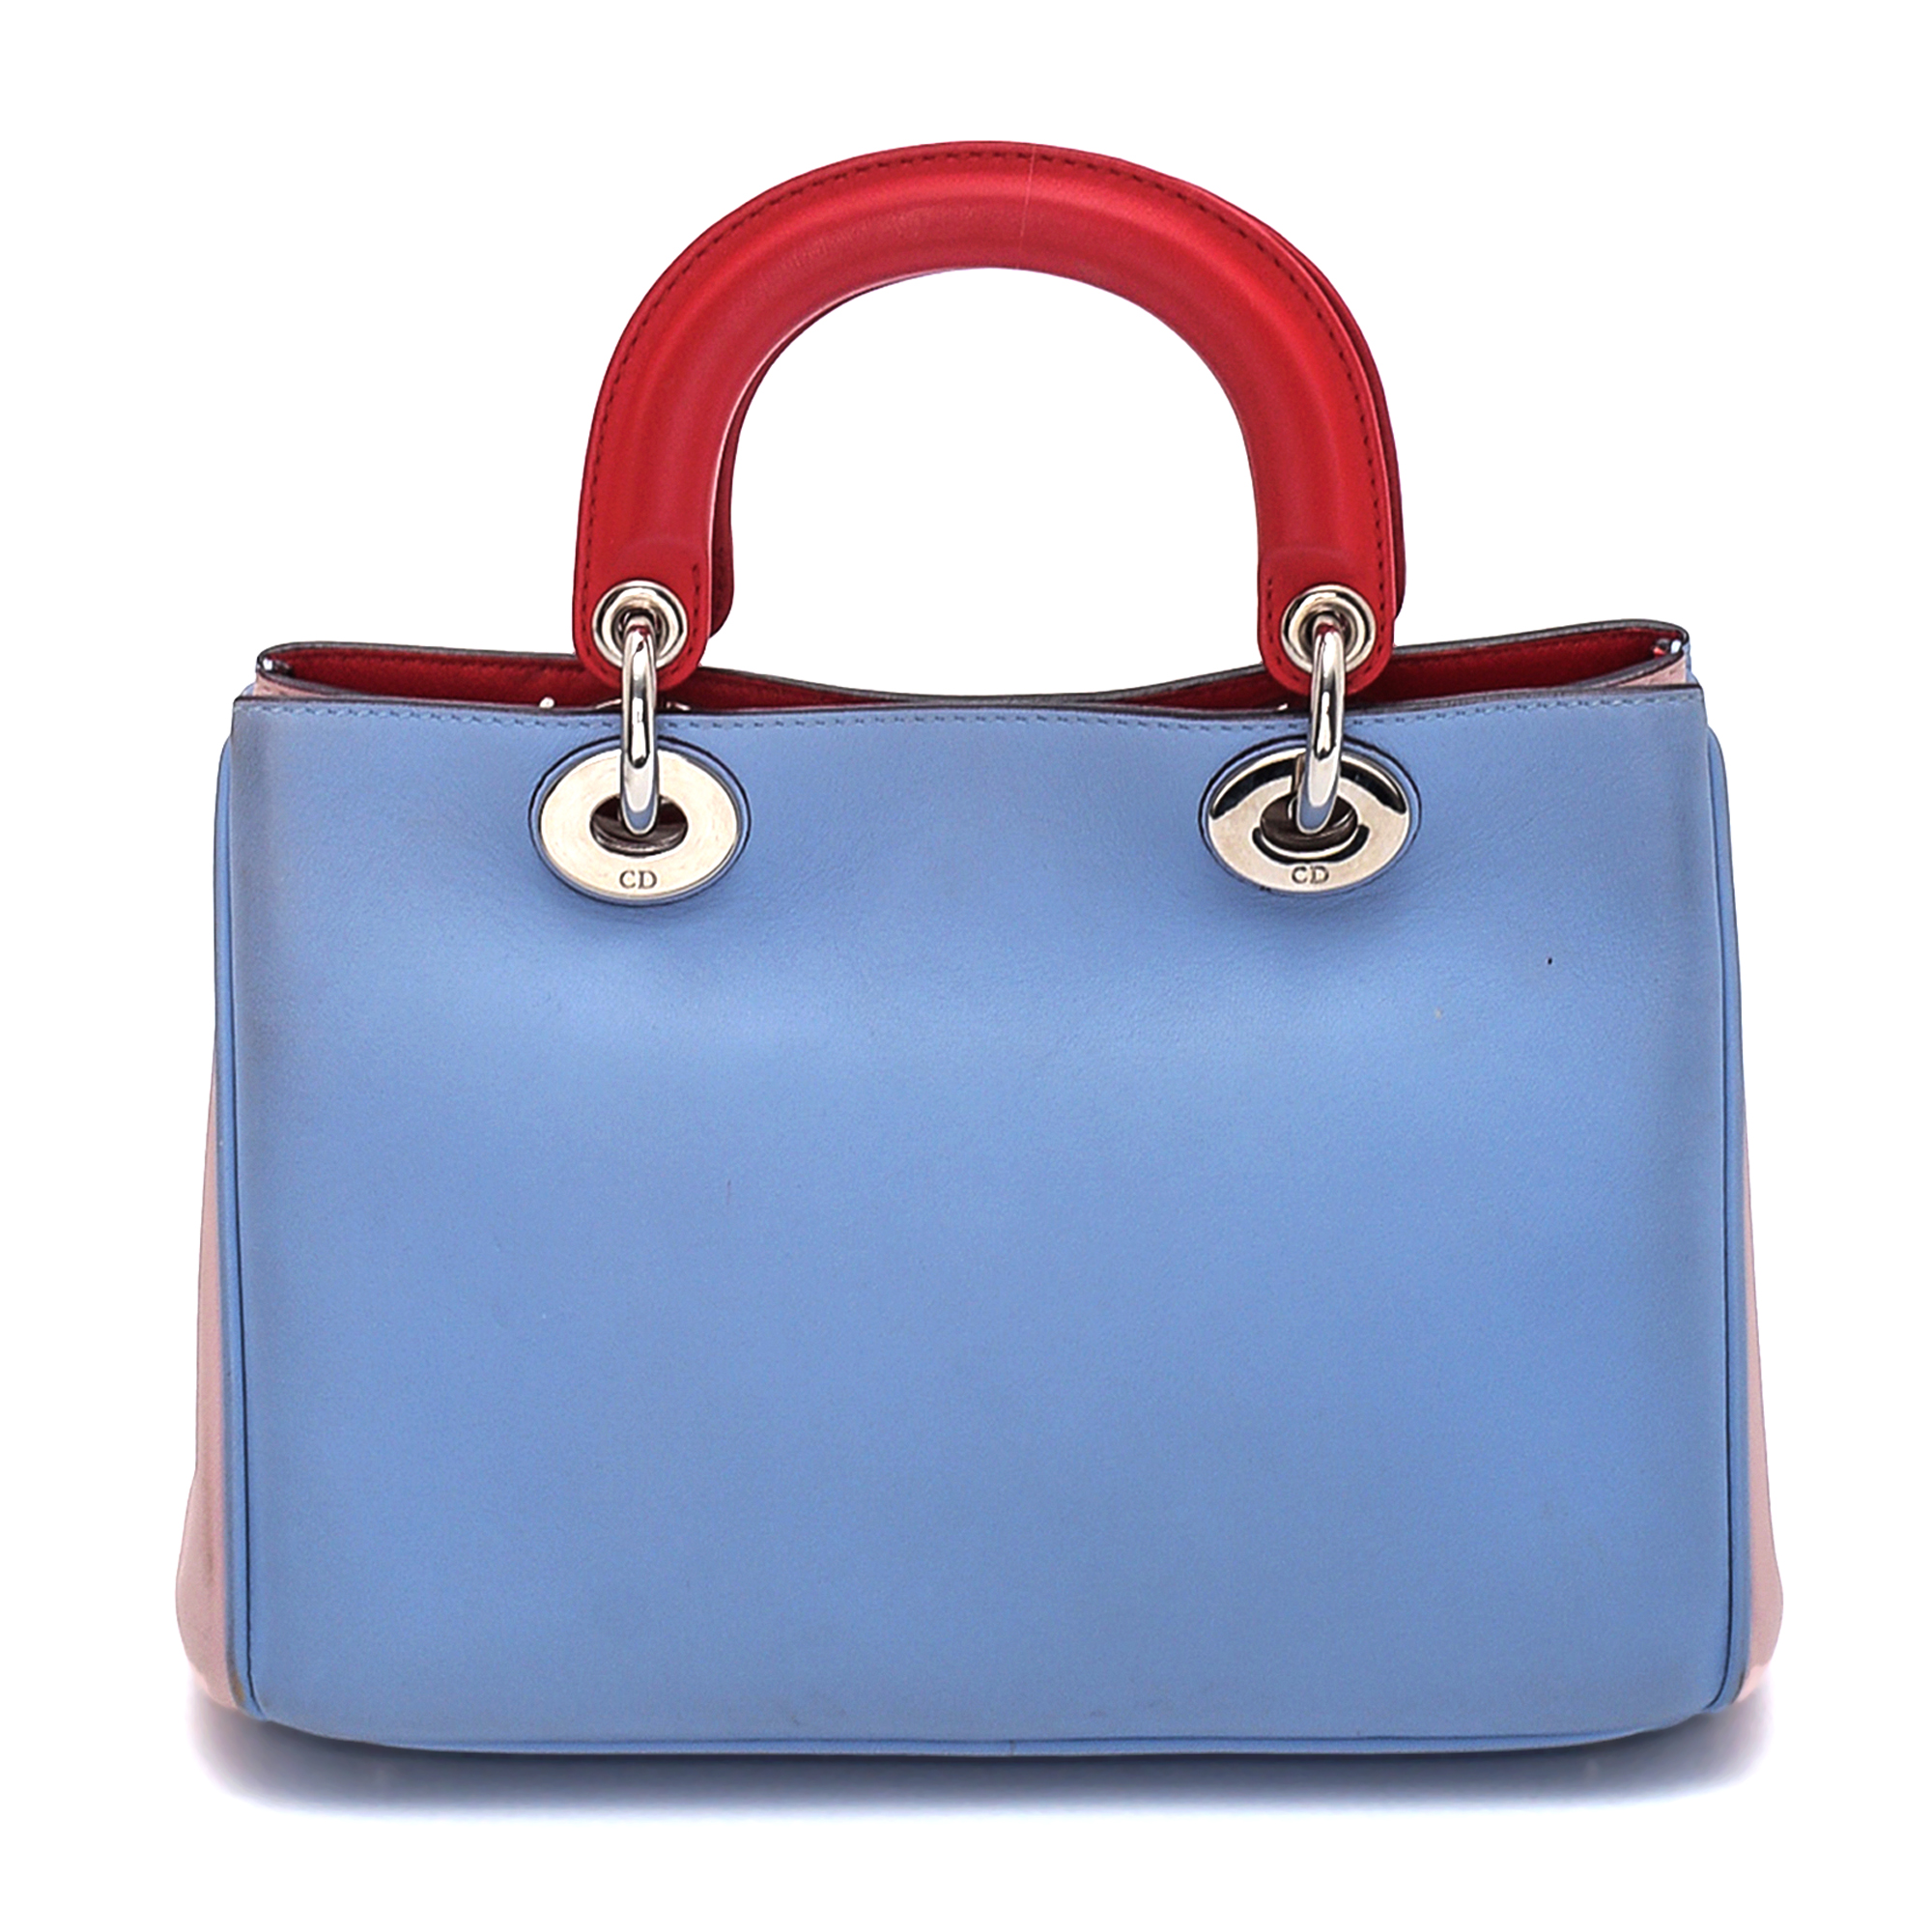 Christian Dior - Baby Blue / Powder Pink & Red Leather Small Diorissimo Bag